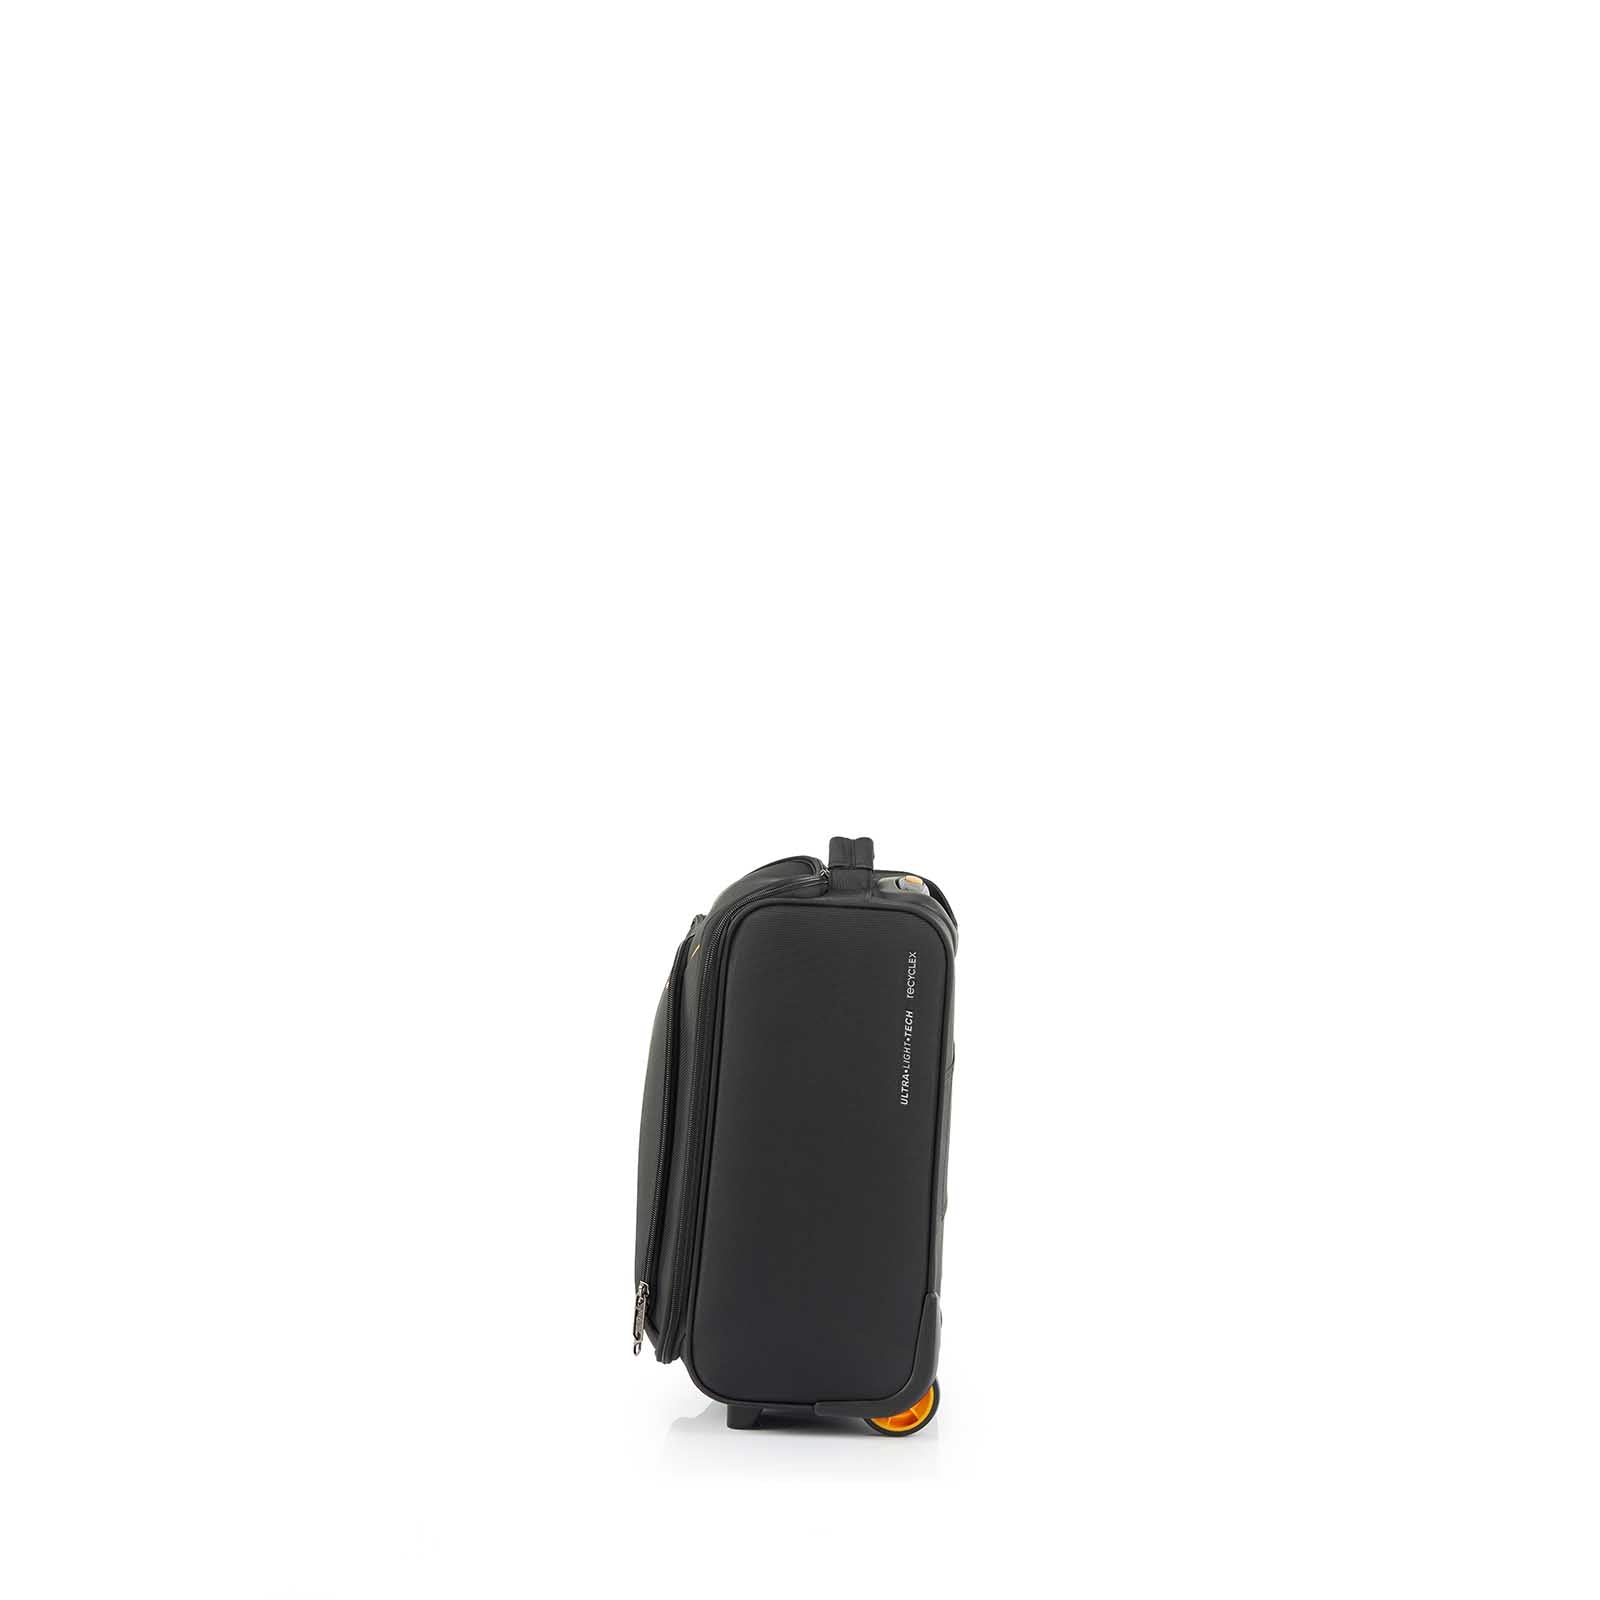 American-Tourister-Applite-4-Eco-Underseater-Suitcase-Black-Mustard-Front-RH